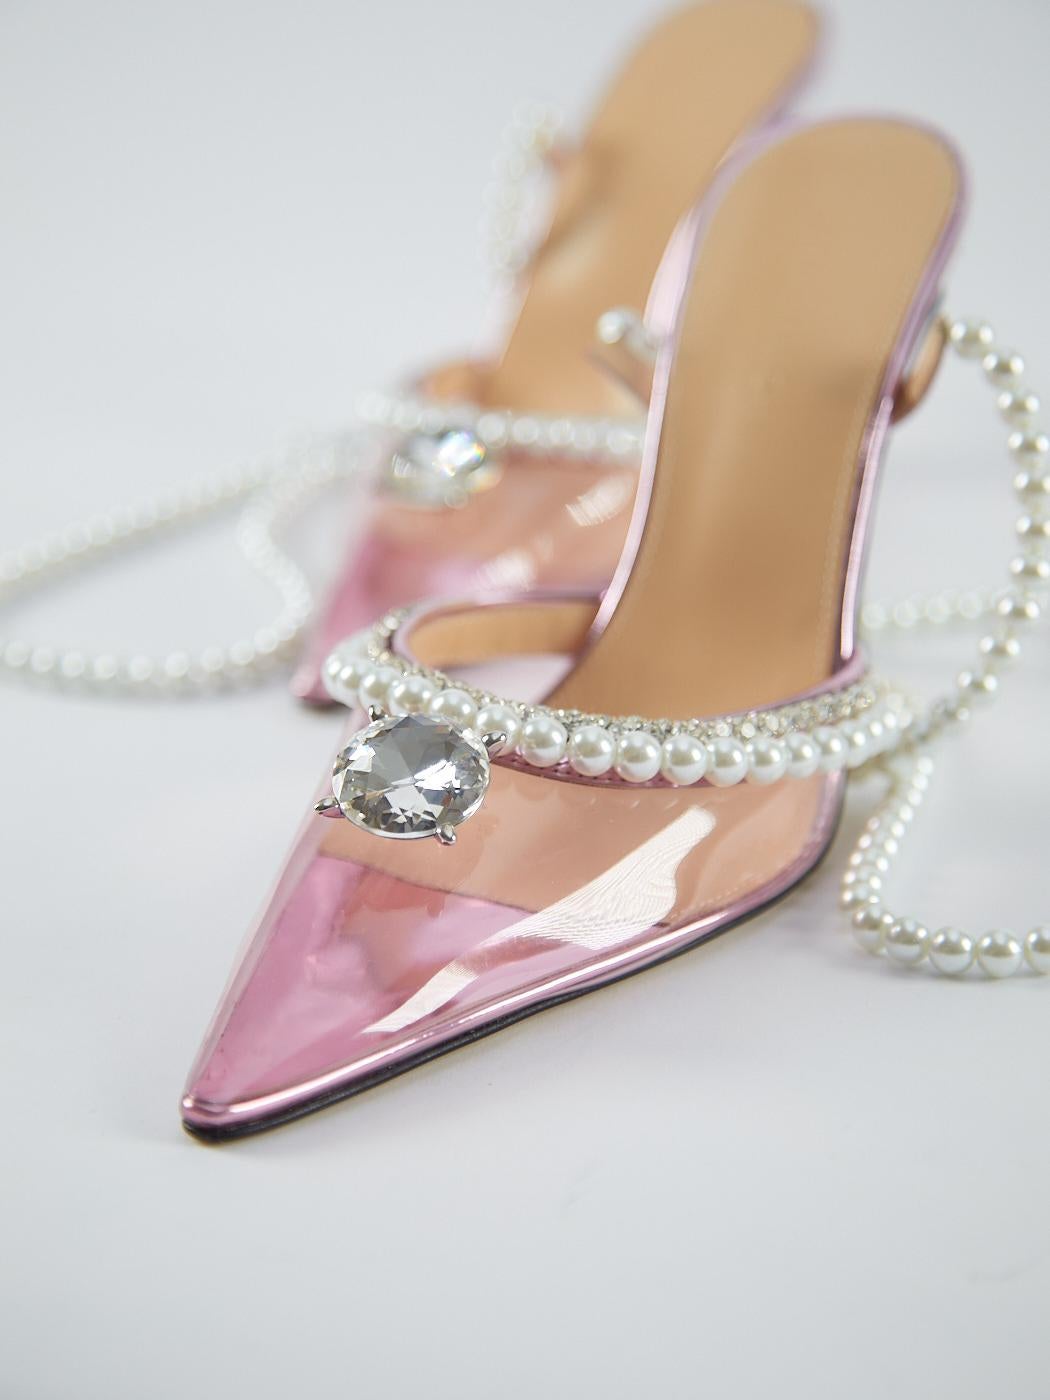 Mach & Mach Diamond of Elizabeth Pumps in Pink 

PVC and patent leather 

Lobster clasp fastening

Size 38.5